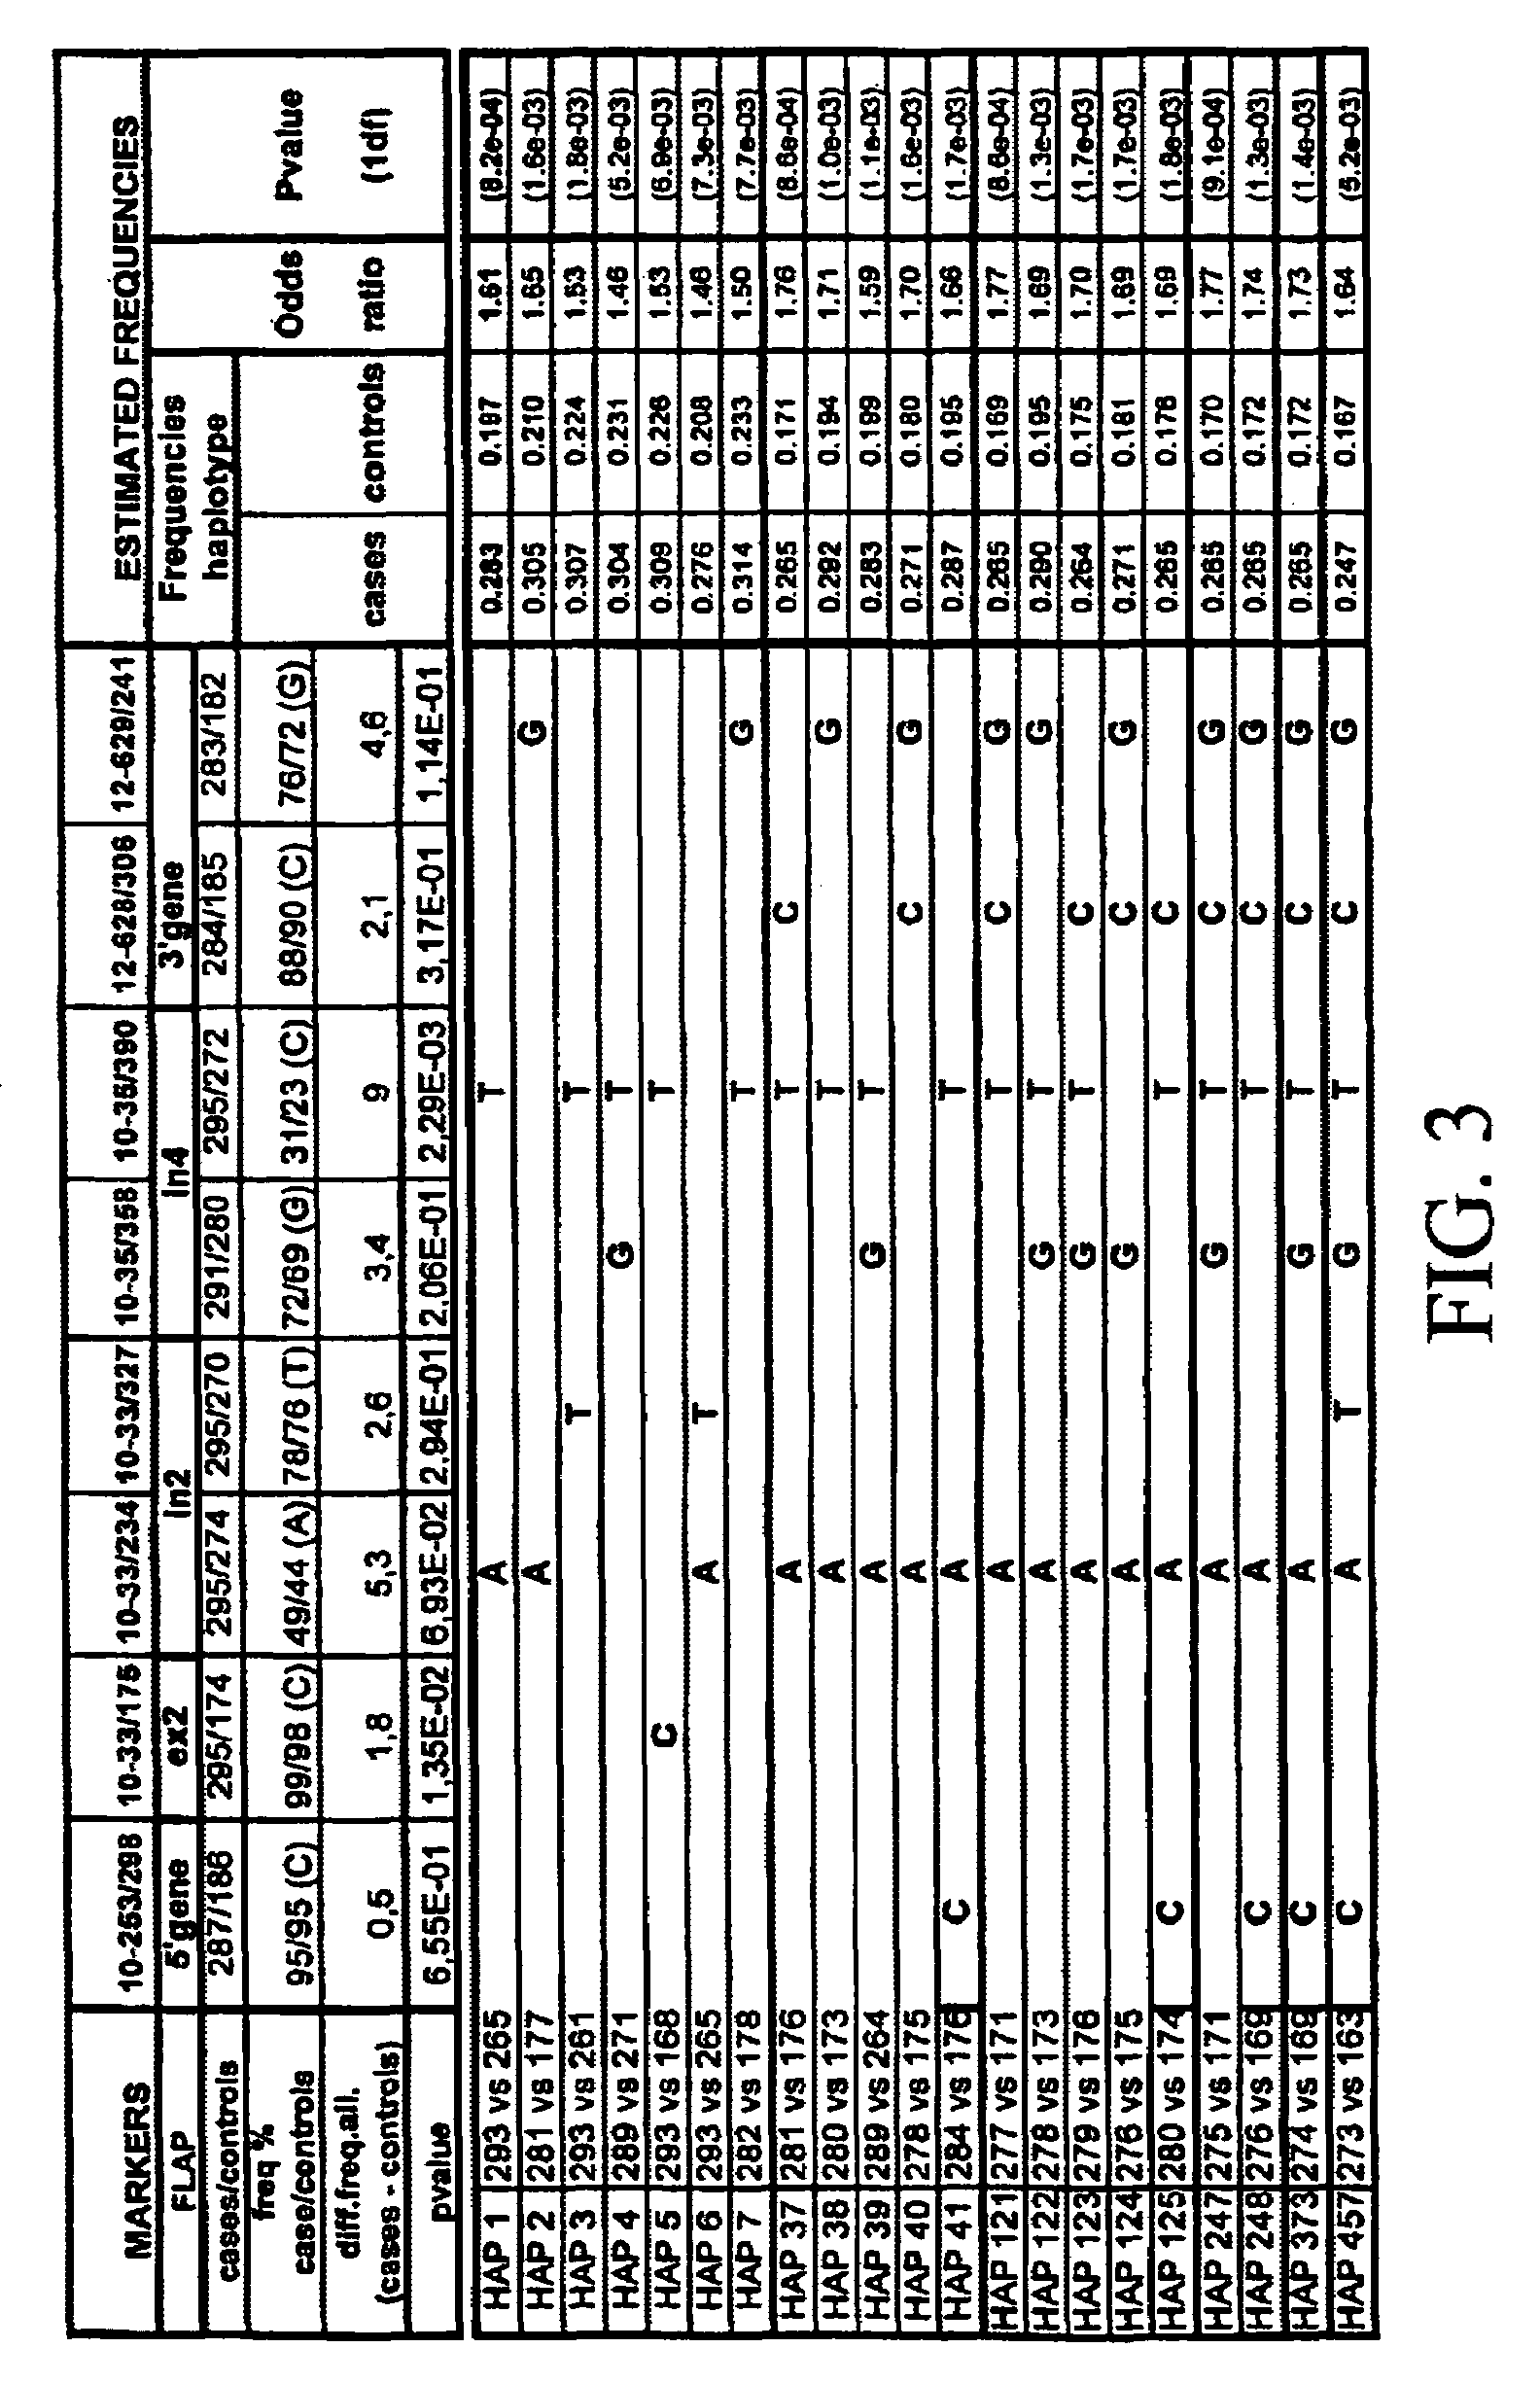 Genomic sequence of the 5-Lipoxygenase-activating protein (FLAP), polymorphic markers thereof and methods for detection of asthma